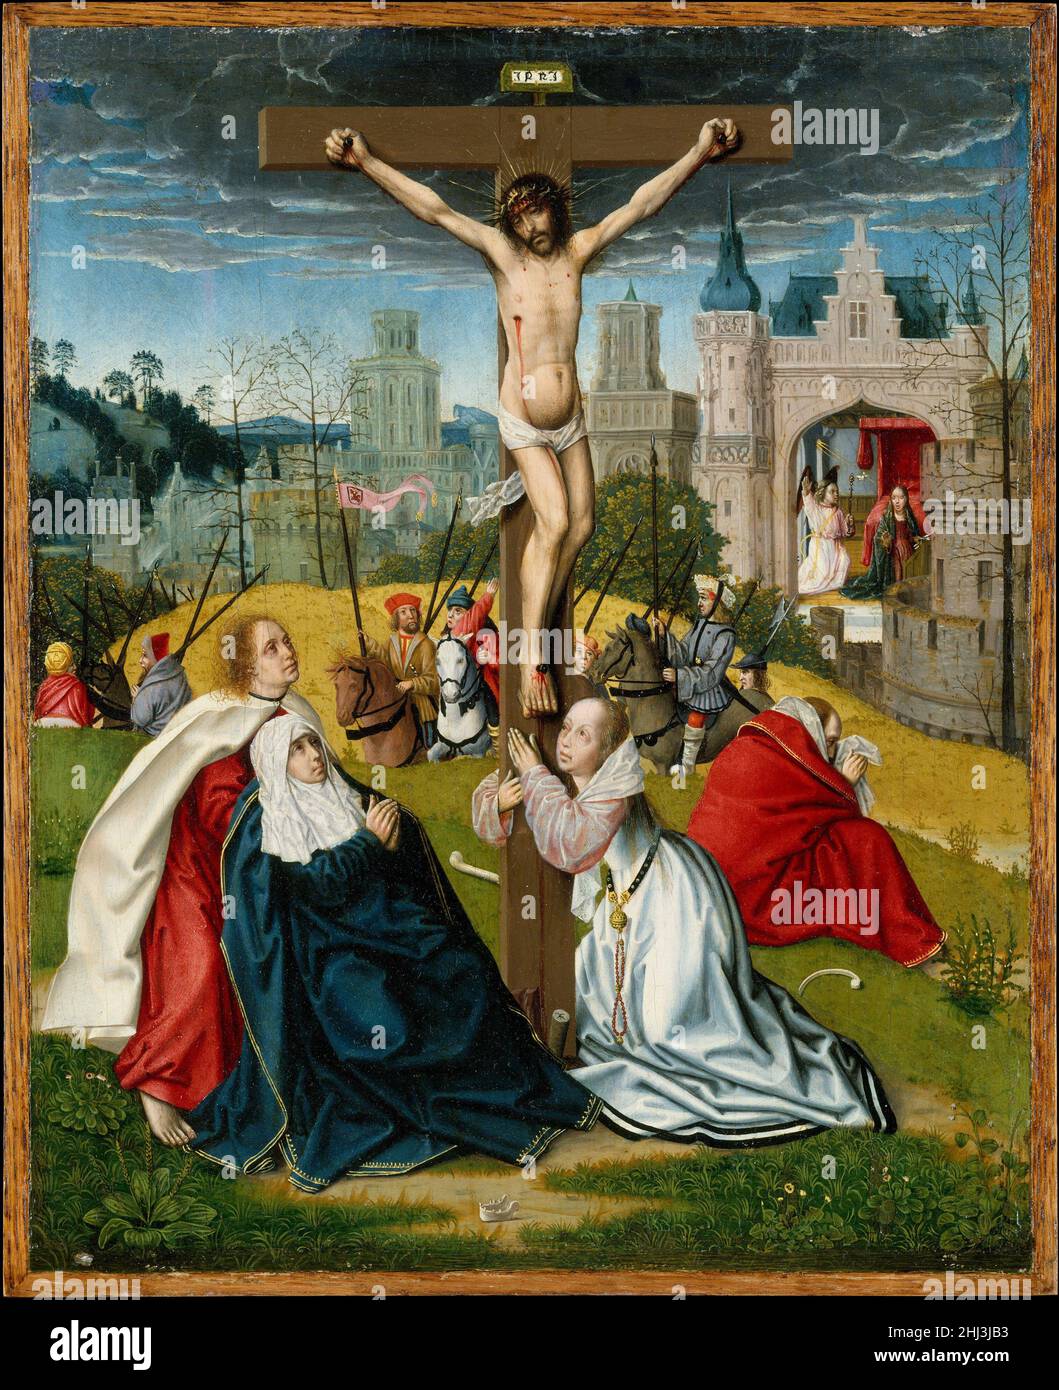 The Crucifixion ca. 1495 Attributed to Jan Provost Netherlandish This exquisite private devotional painting contrasts Mary’s joy at the Annunciation, shown in the background, with her sorrow at the Crucifixion, where she swoons in John’s arms. The darkened sky heightens the poignancy of the Passion scene. Scattered around the cross are bones, referring to the belief that Adam’s skull was located on Golgotha. The pairing of the Annunciation and the Crucifixion accords with the medieval tradition that dedicated March 25th to the memory of Adam, the Annunciation, and Christ’s death, thus relating Stock Photo